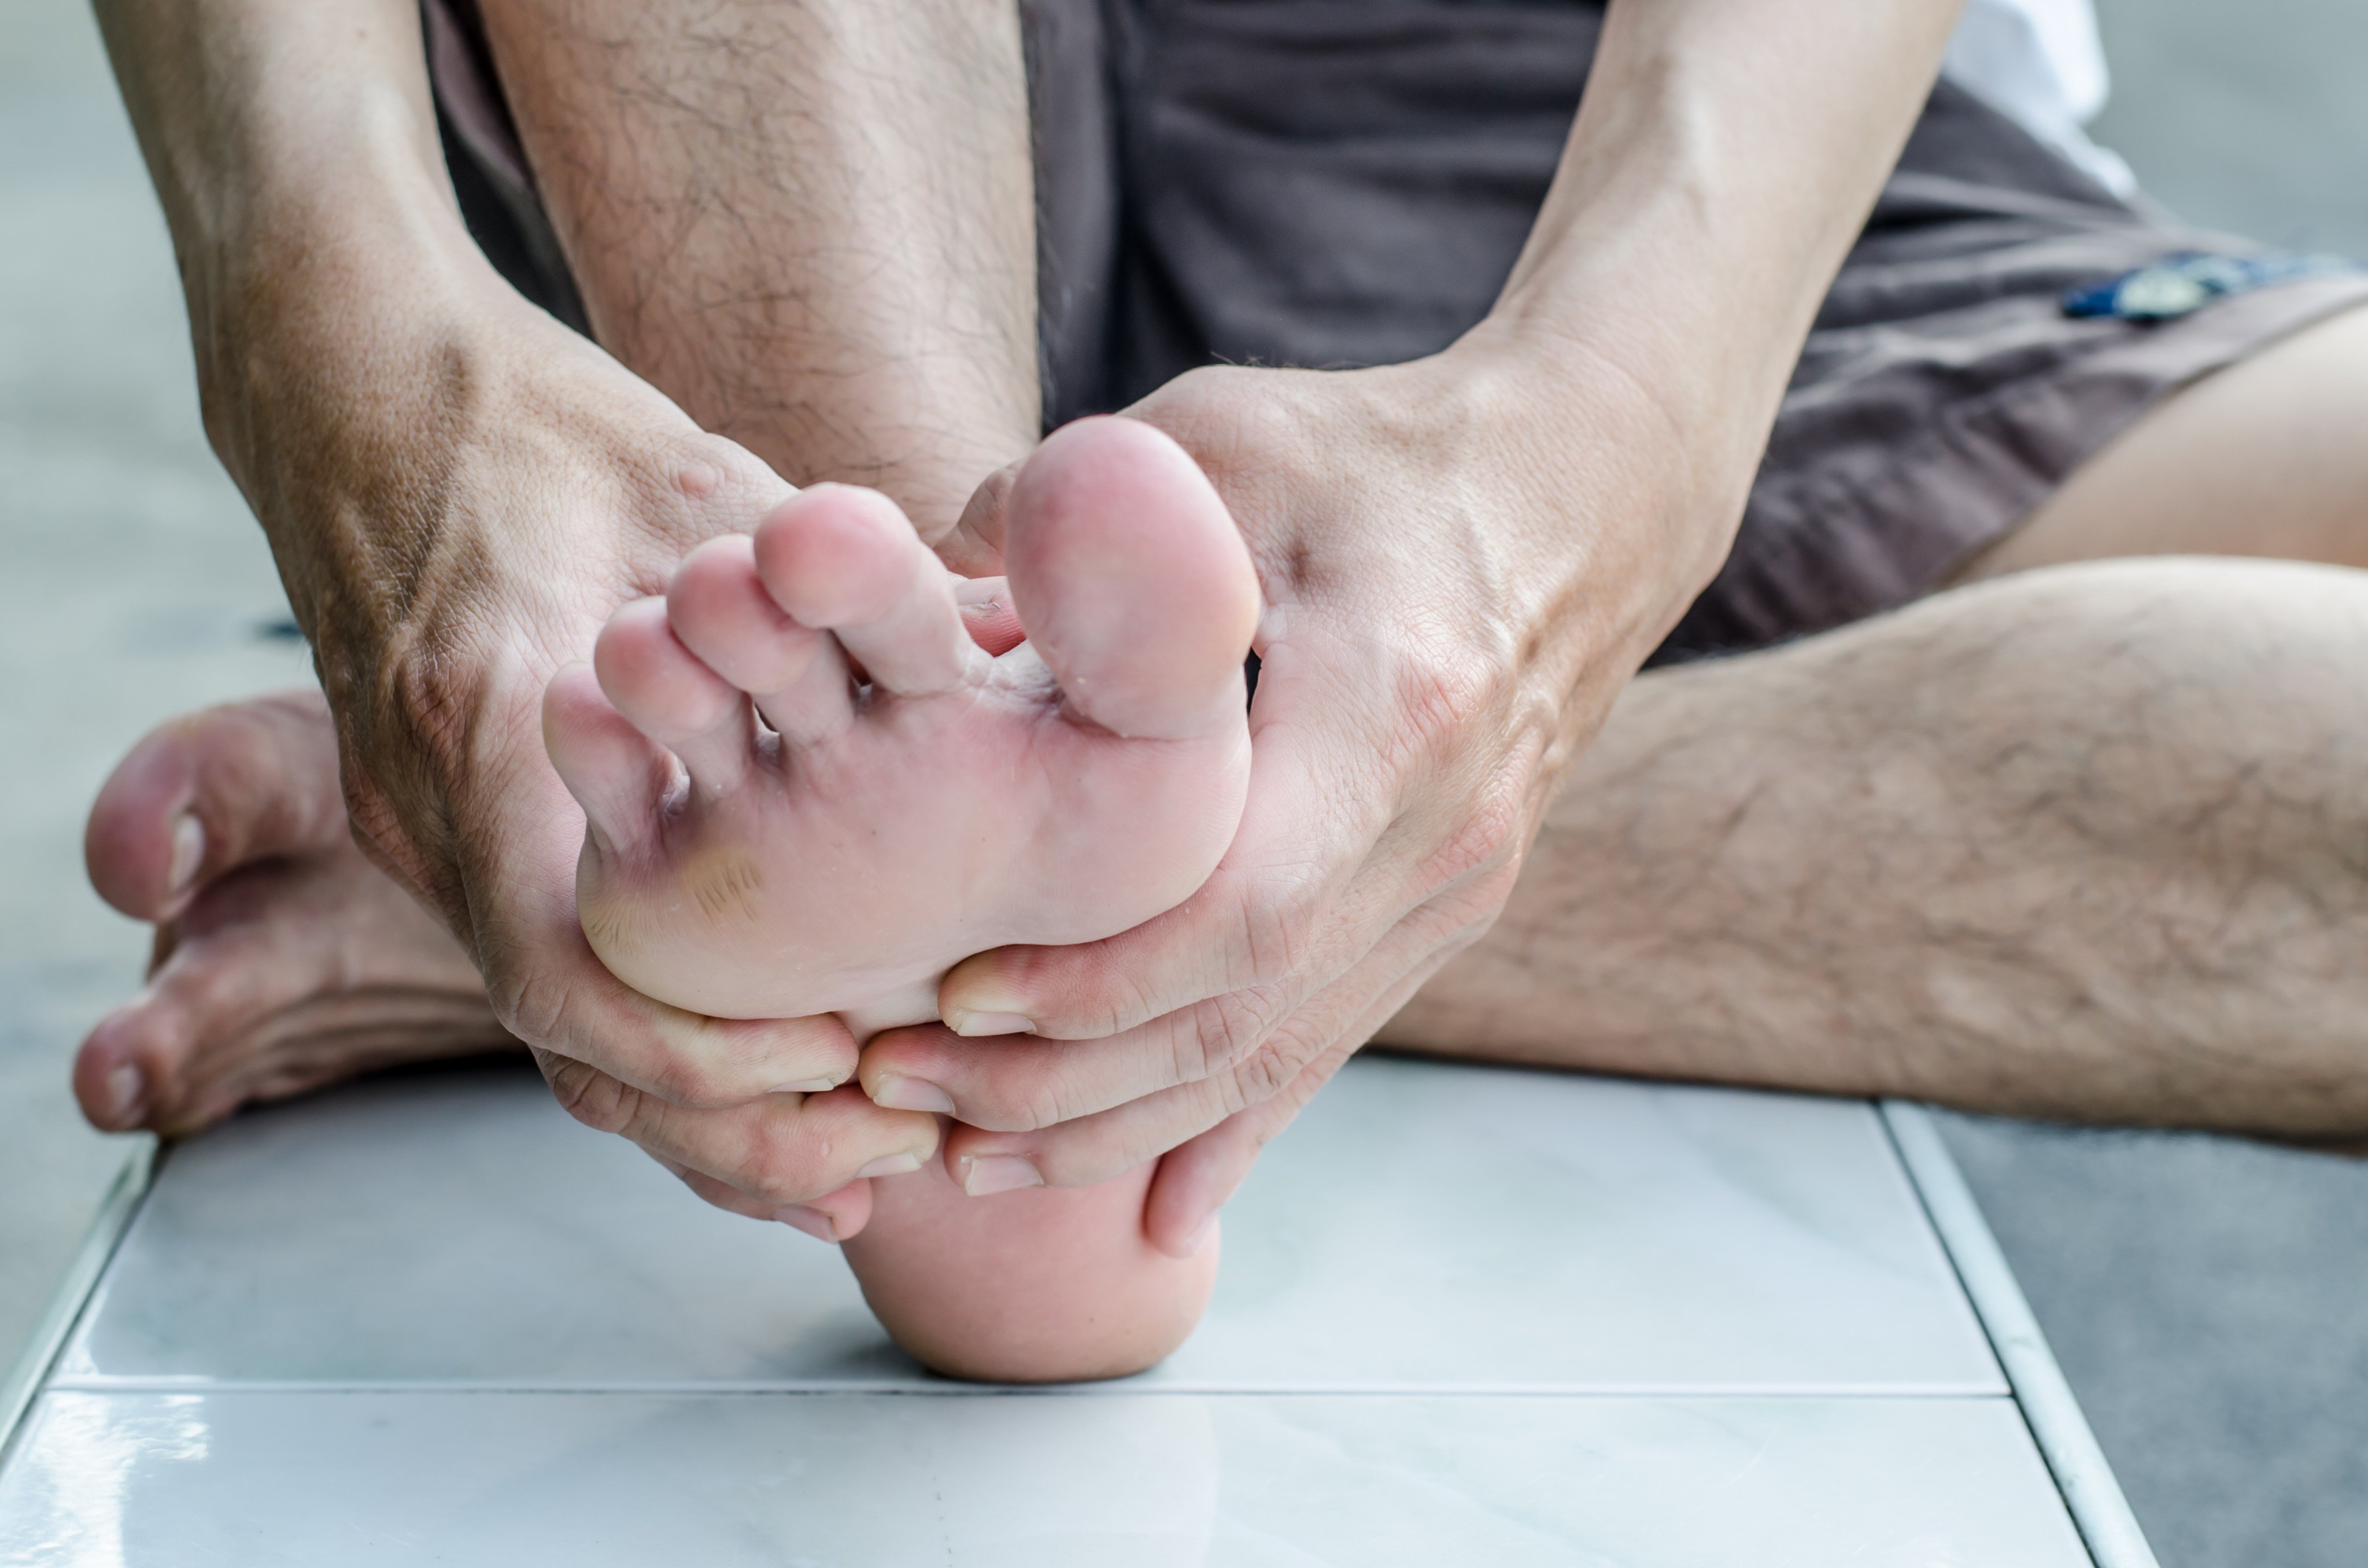 What You Need to Know About Ingrown Toenails